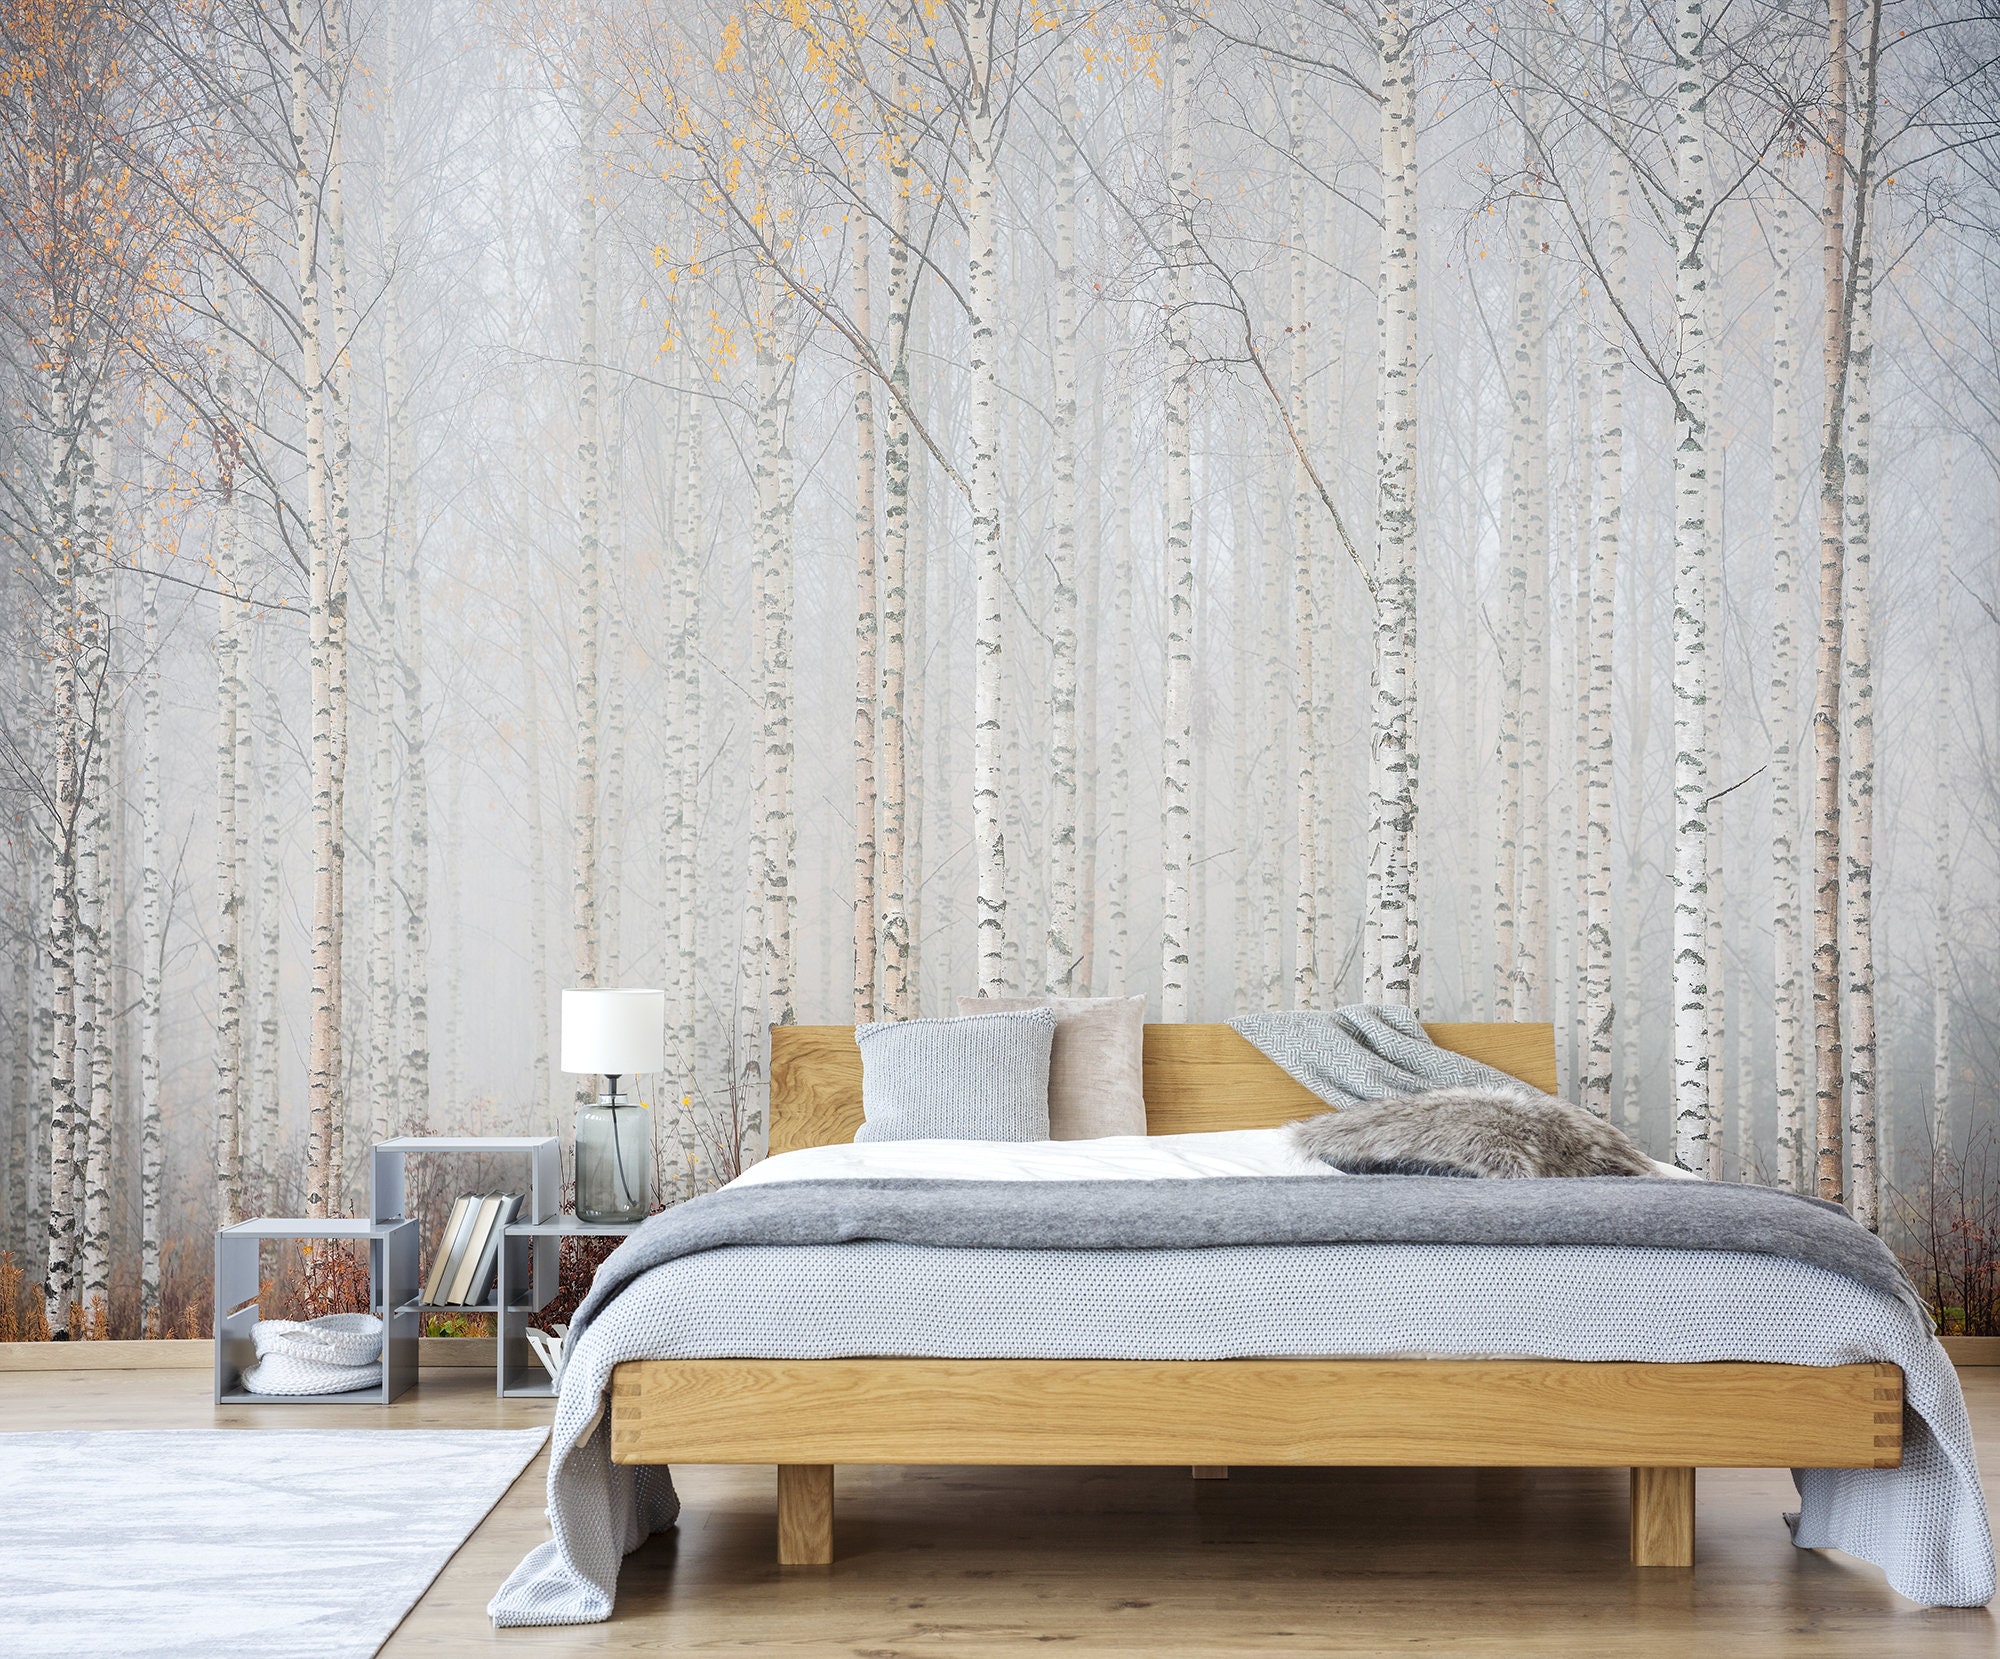 Birch Tree Forest Wallpaper Self Adhesive Peel and Stick - Etsy